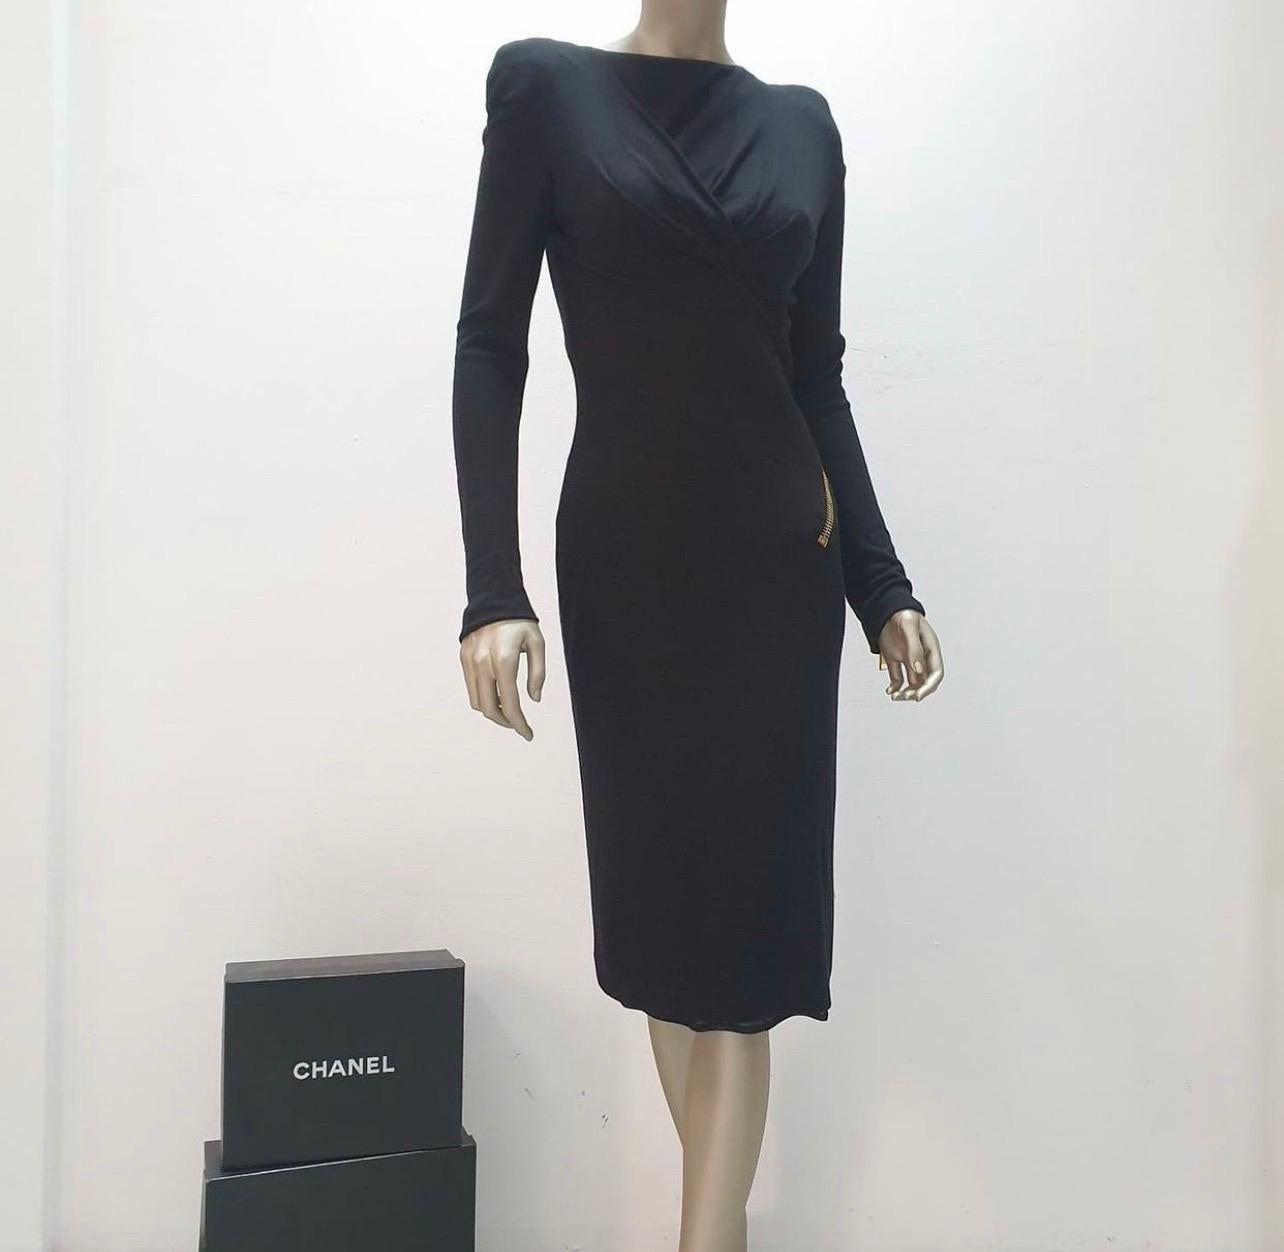 Tom Ford Black Long Sleeve Zip Mini Dress
TOM FORD WOMEN'S BLACK SIGNATURE ZIP DRESS

- BLACK ROUND NECK WITH A V-DRAPED FRONT

- SHOULDER PADS

- GUNMETAL SIGNATURE METAL ZIP

Sz.44

Very good condition.